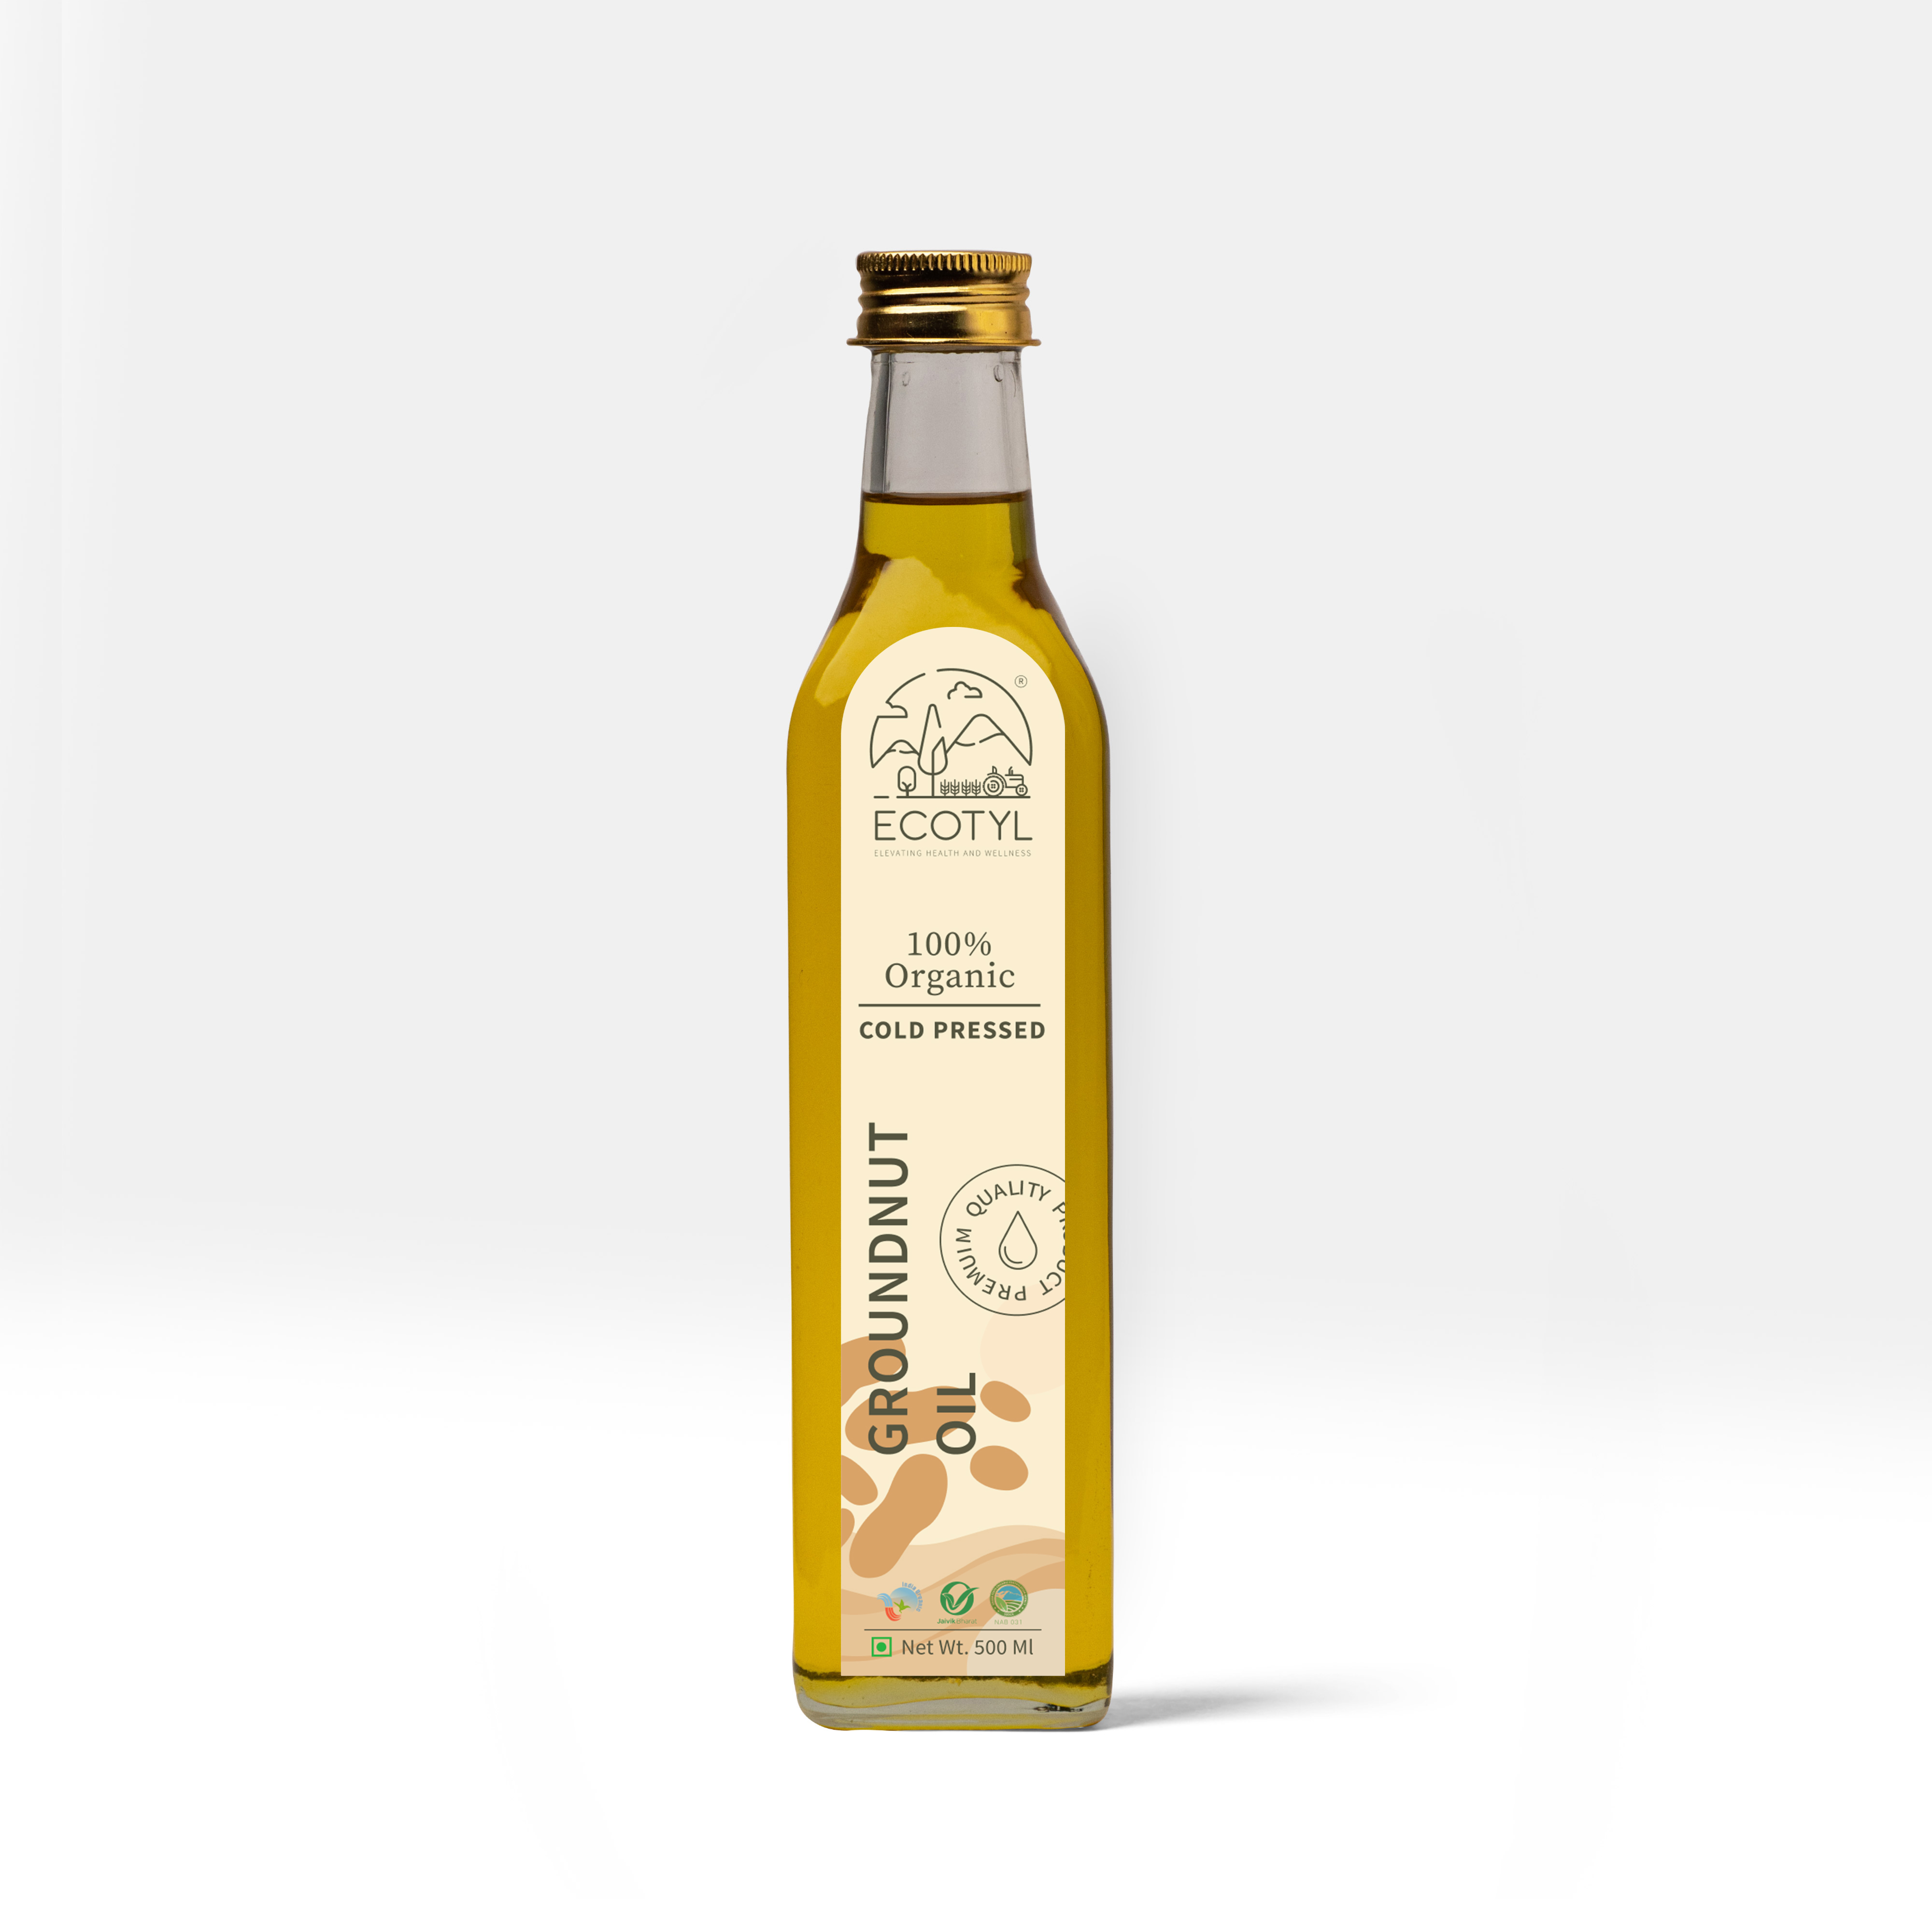 Buy Ecotyl Organic Cold-Pressed Groundnut Oil - 500 ml at Best Price Online